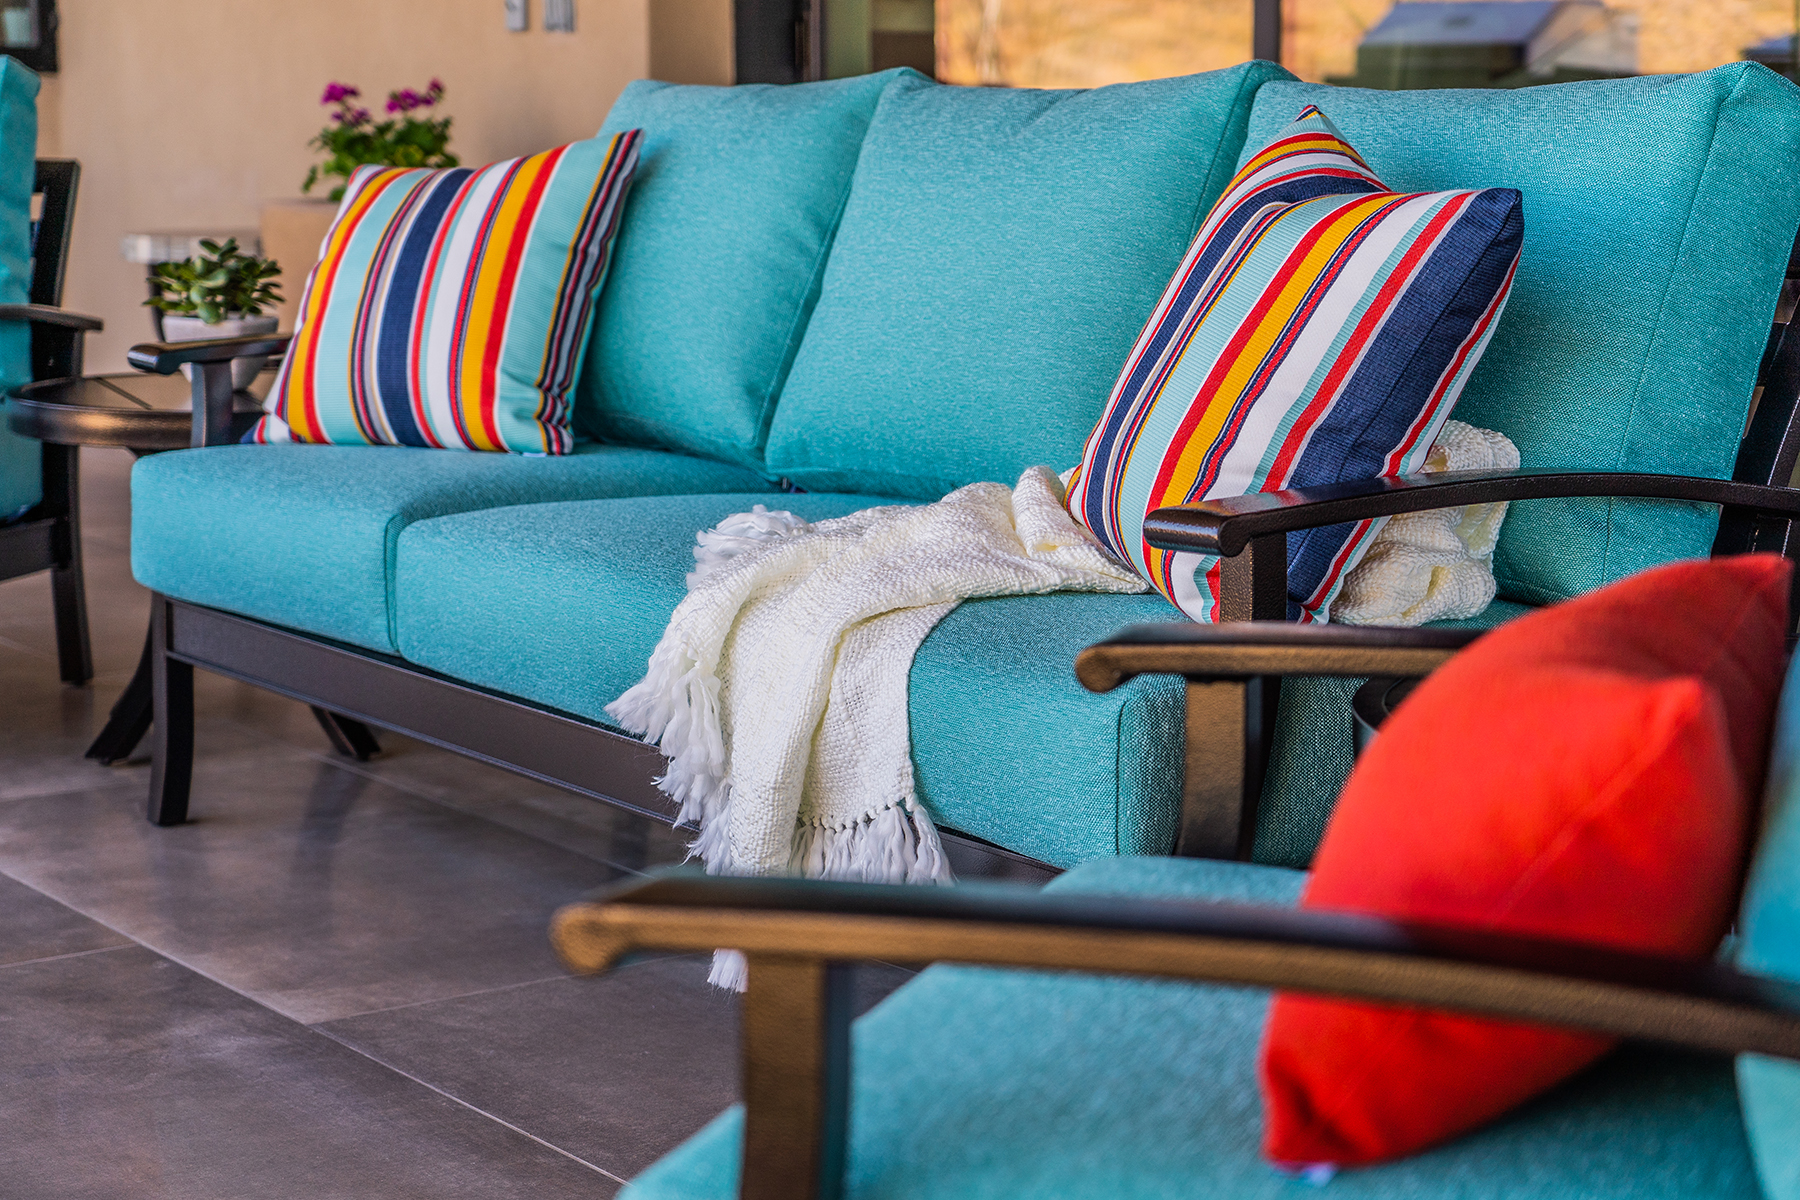 A blue outdoor couch with colorful pillows